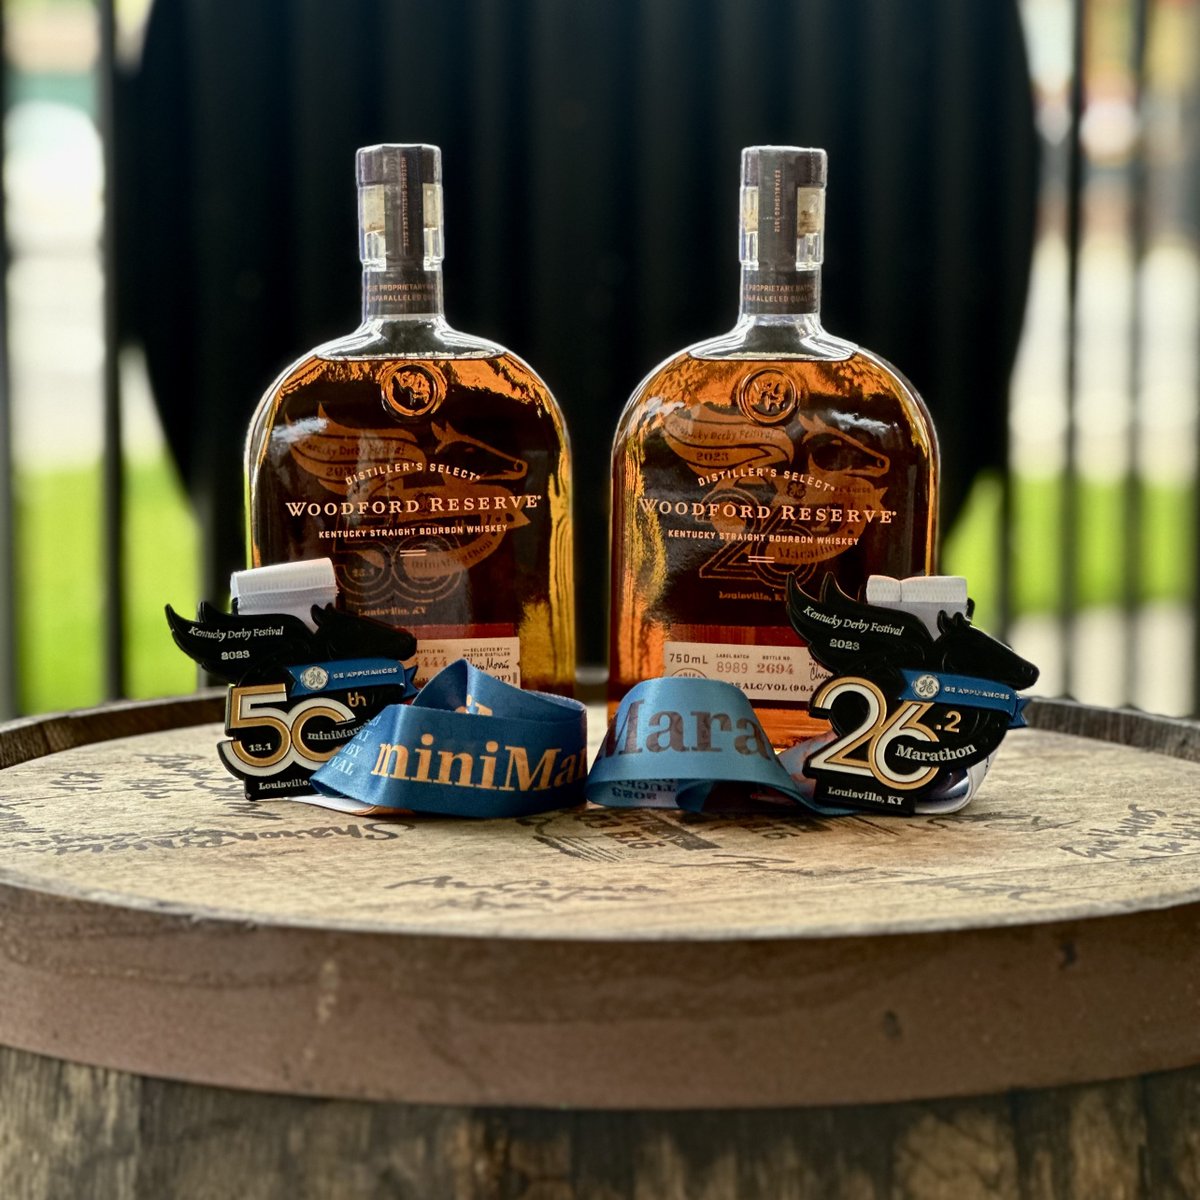 🚨 LAST CHANCE 🚨

Attention runners! There’s still time to get your commemorative bottle of @WoodfordReserve, marking the 50th run of the @GEAppliancesCo  #DerbyFestivalmini or 22nd #DerbyFestivalMarathon!

Continue to thread⬇️